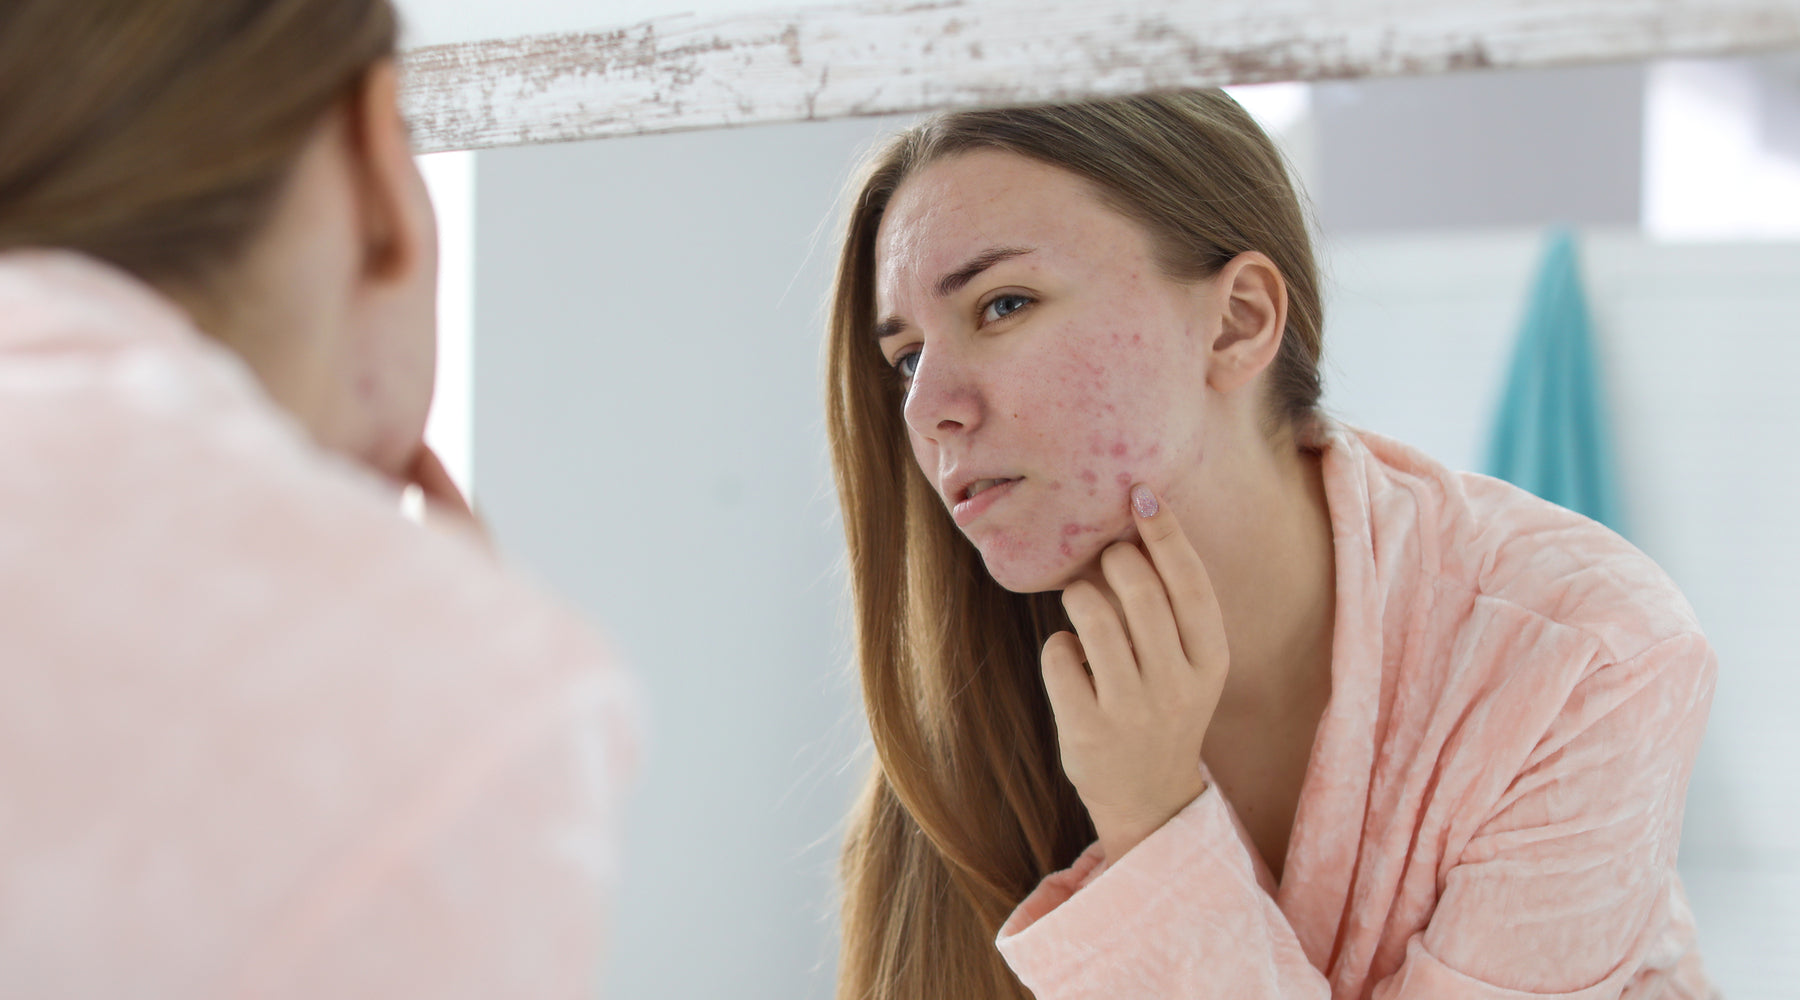 Does Acne Get Worse Before it Gets Better? How to Know